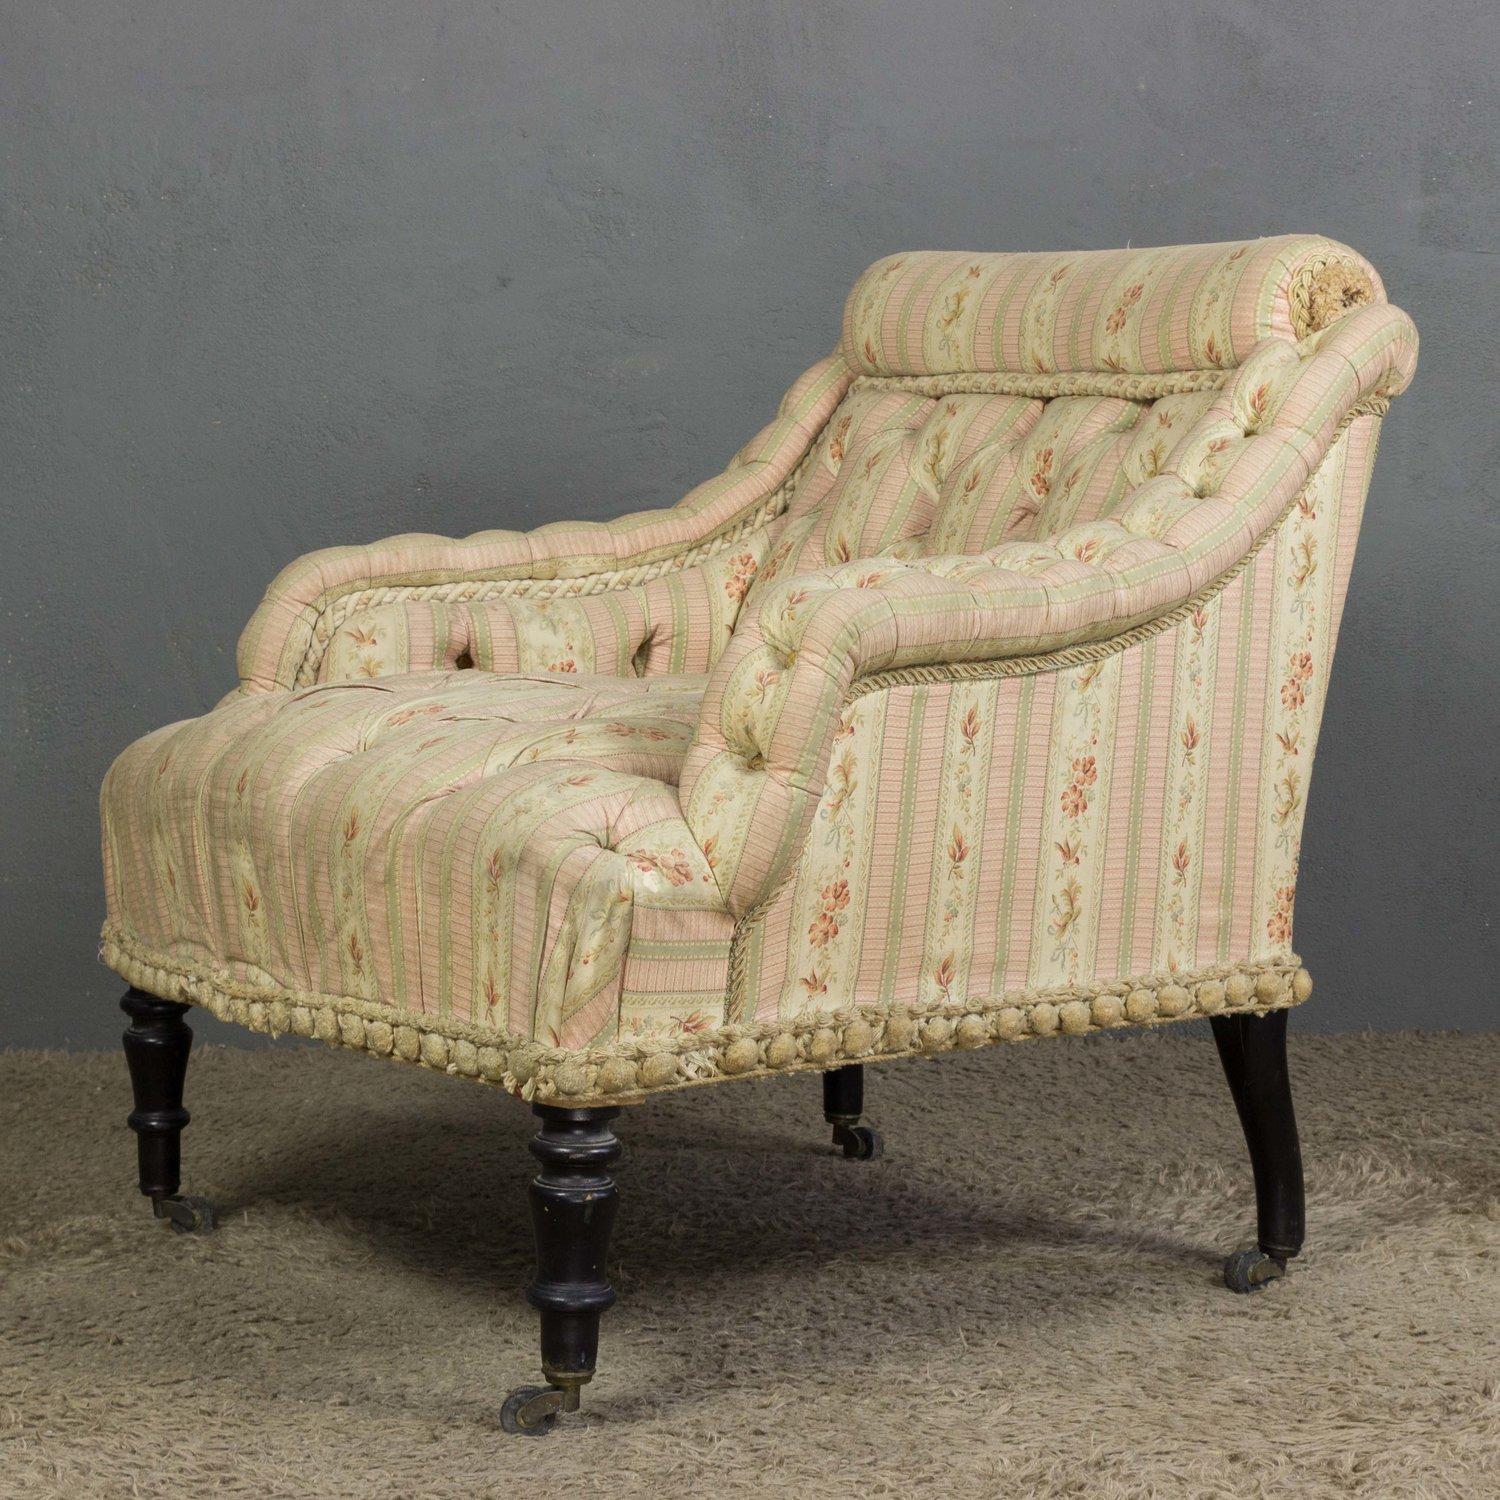 A lovely French 19th century tufted armchair. Vintage and timelessly elegant, this chair will bring a Classic touch of charm to any interior. Upholstered in vintage pink fabric with a beautiful floral stripe, this piece is detailed with trim, and